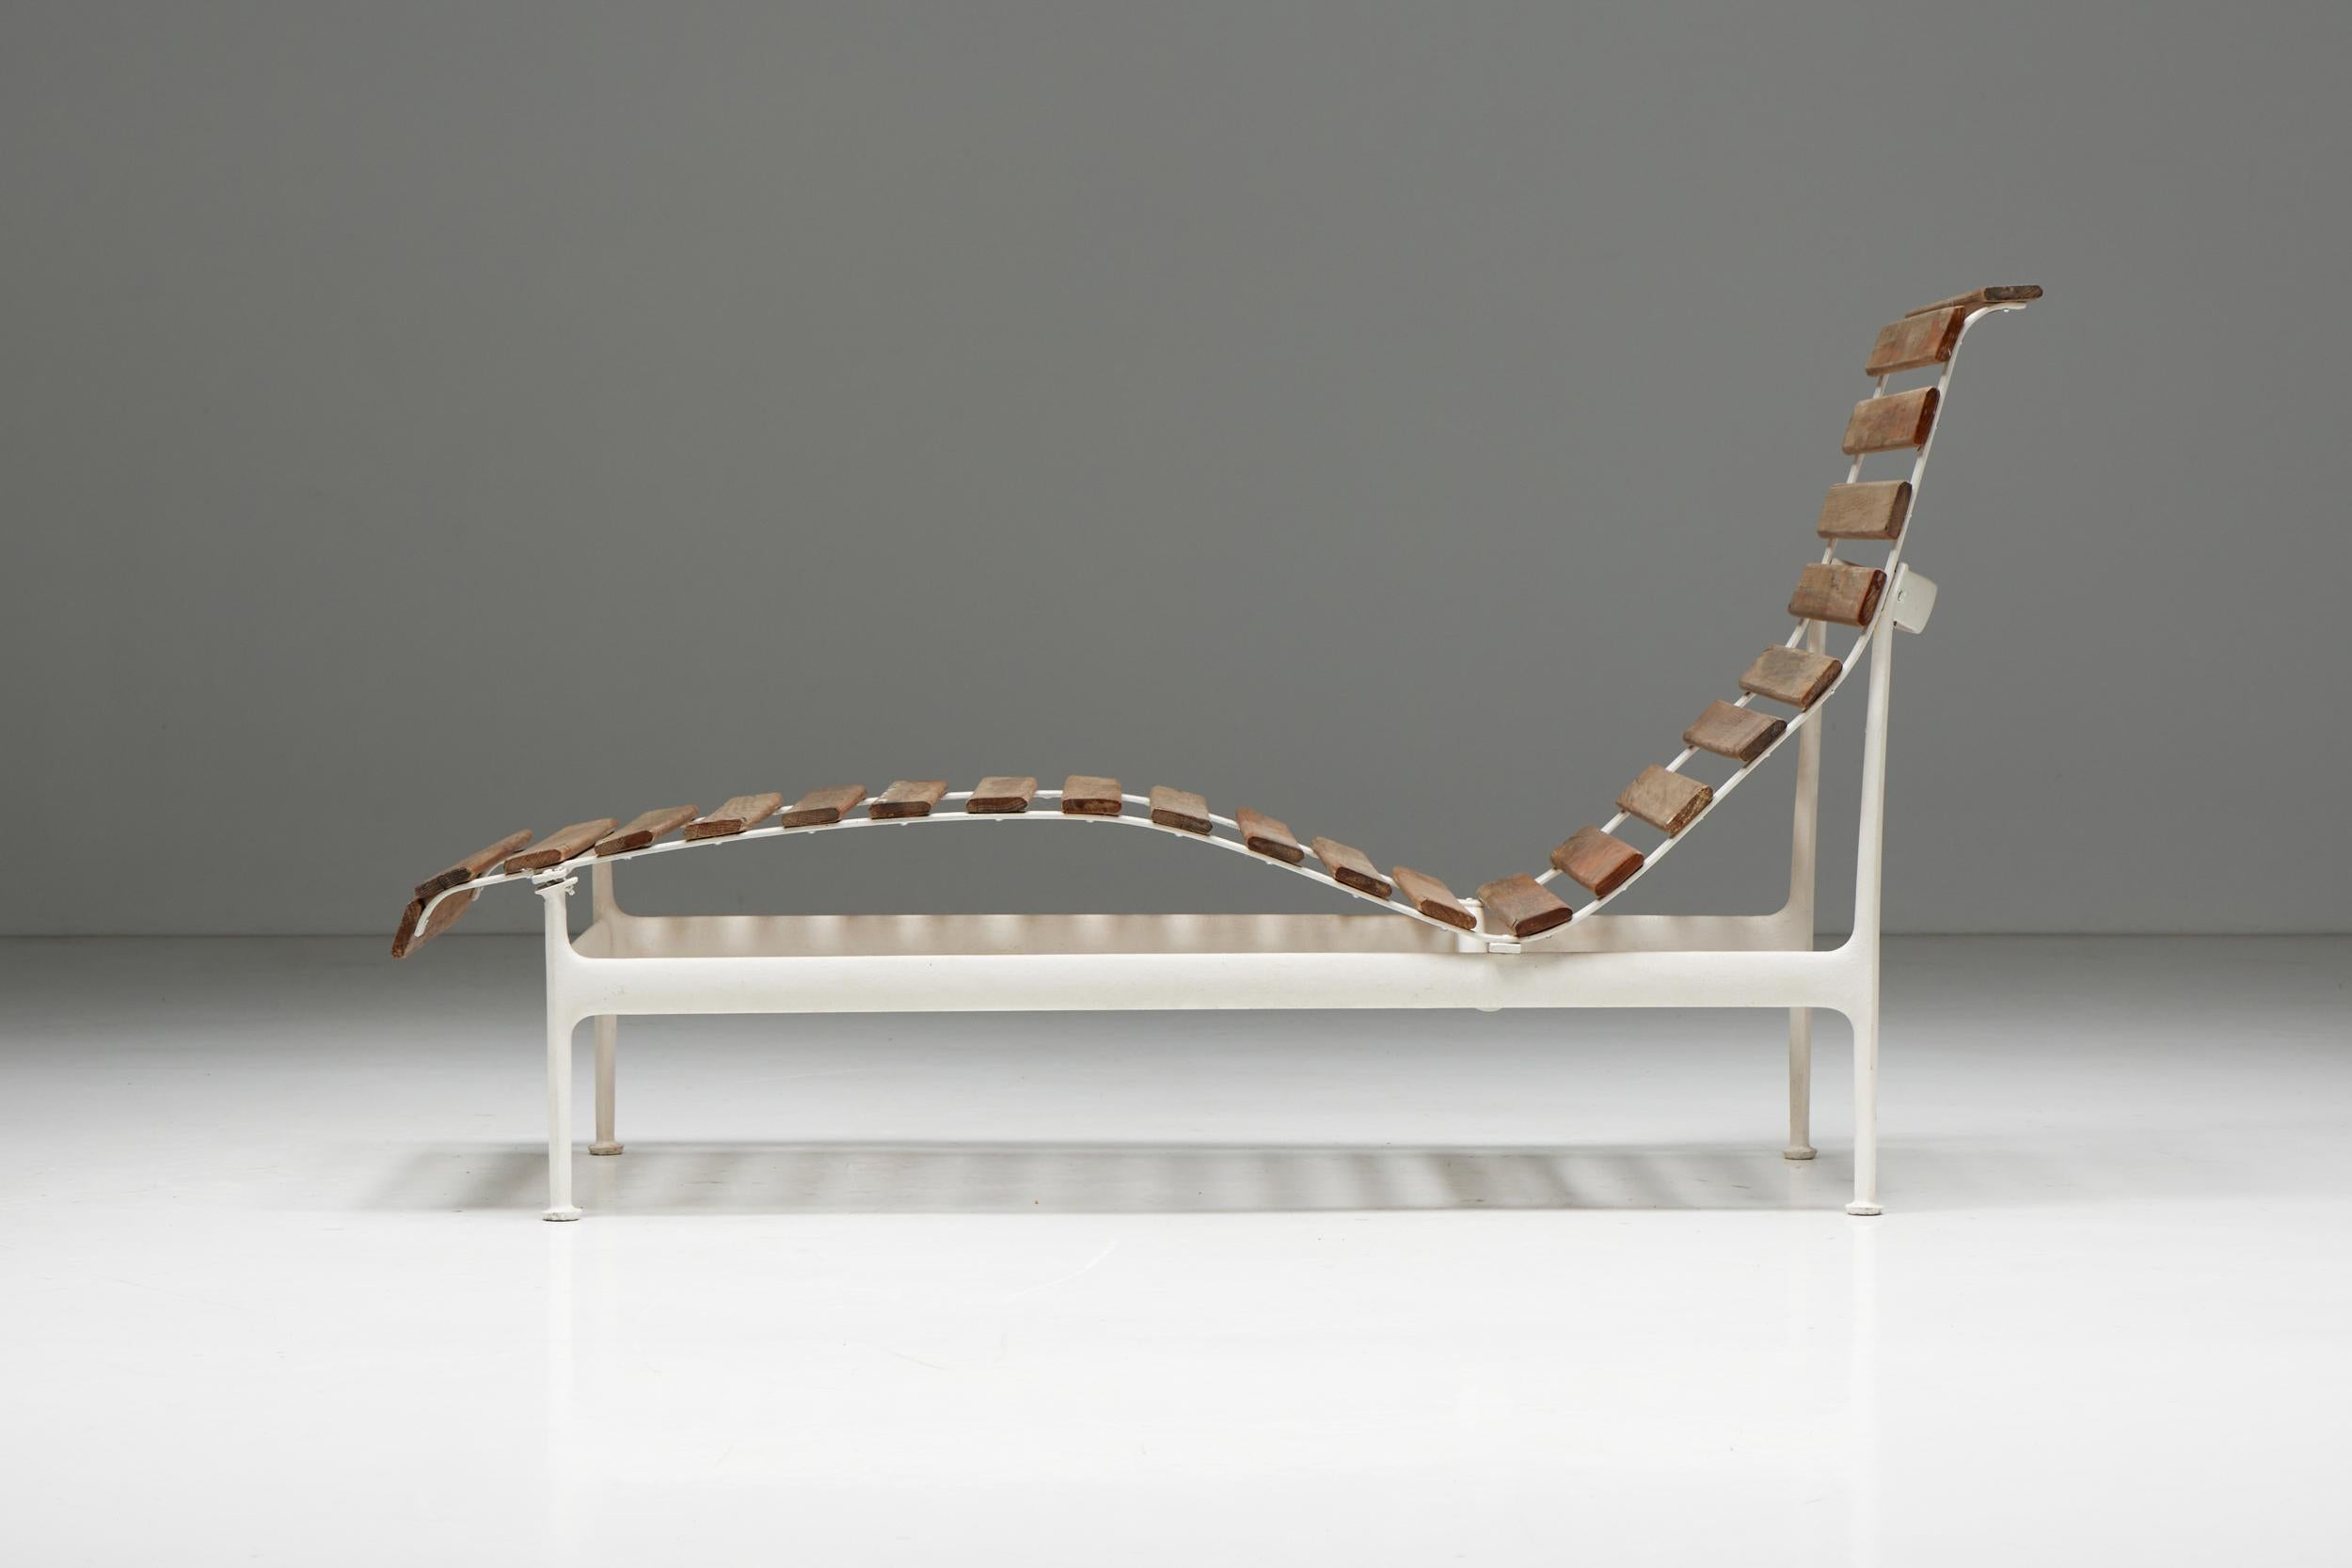 Steel Chaise Longue by Richard Schultz for Knoll International, United States, 1960s For Sale